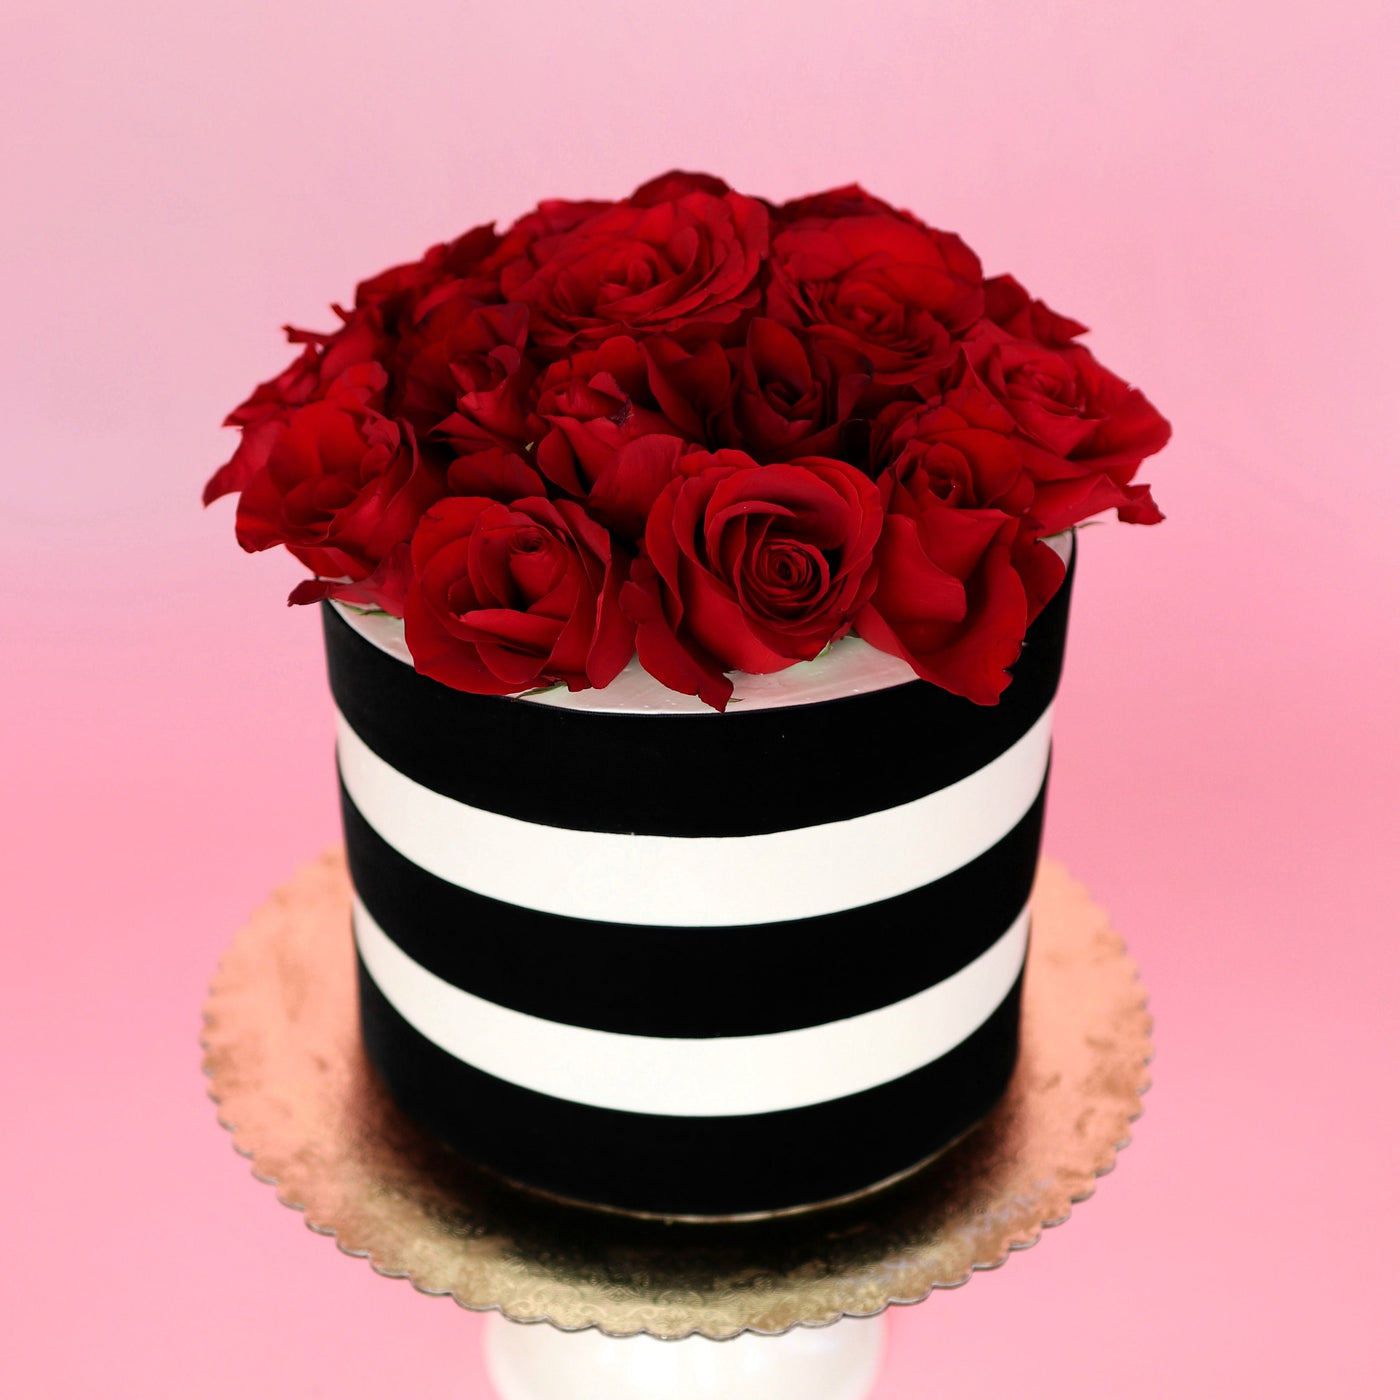 Place that beautiful floral design and sit it perfectly on top of your cake. This season's blooms paired with the most flavorful cake in town is the perfect addition to your  evening. best bakery vegas delivery